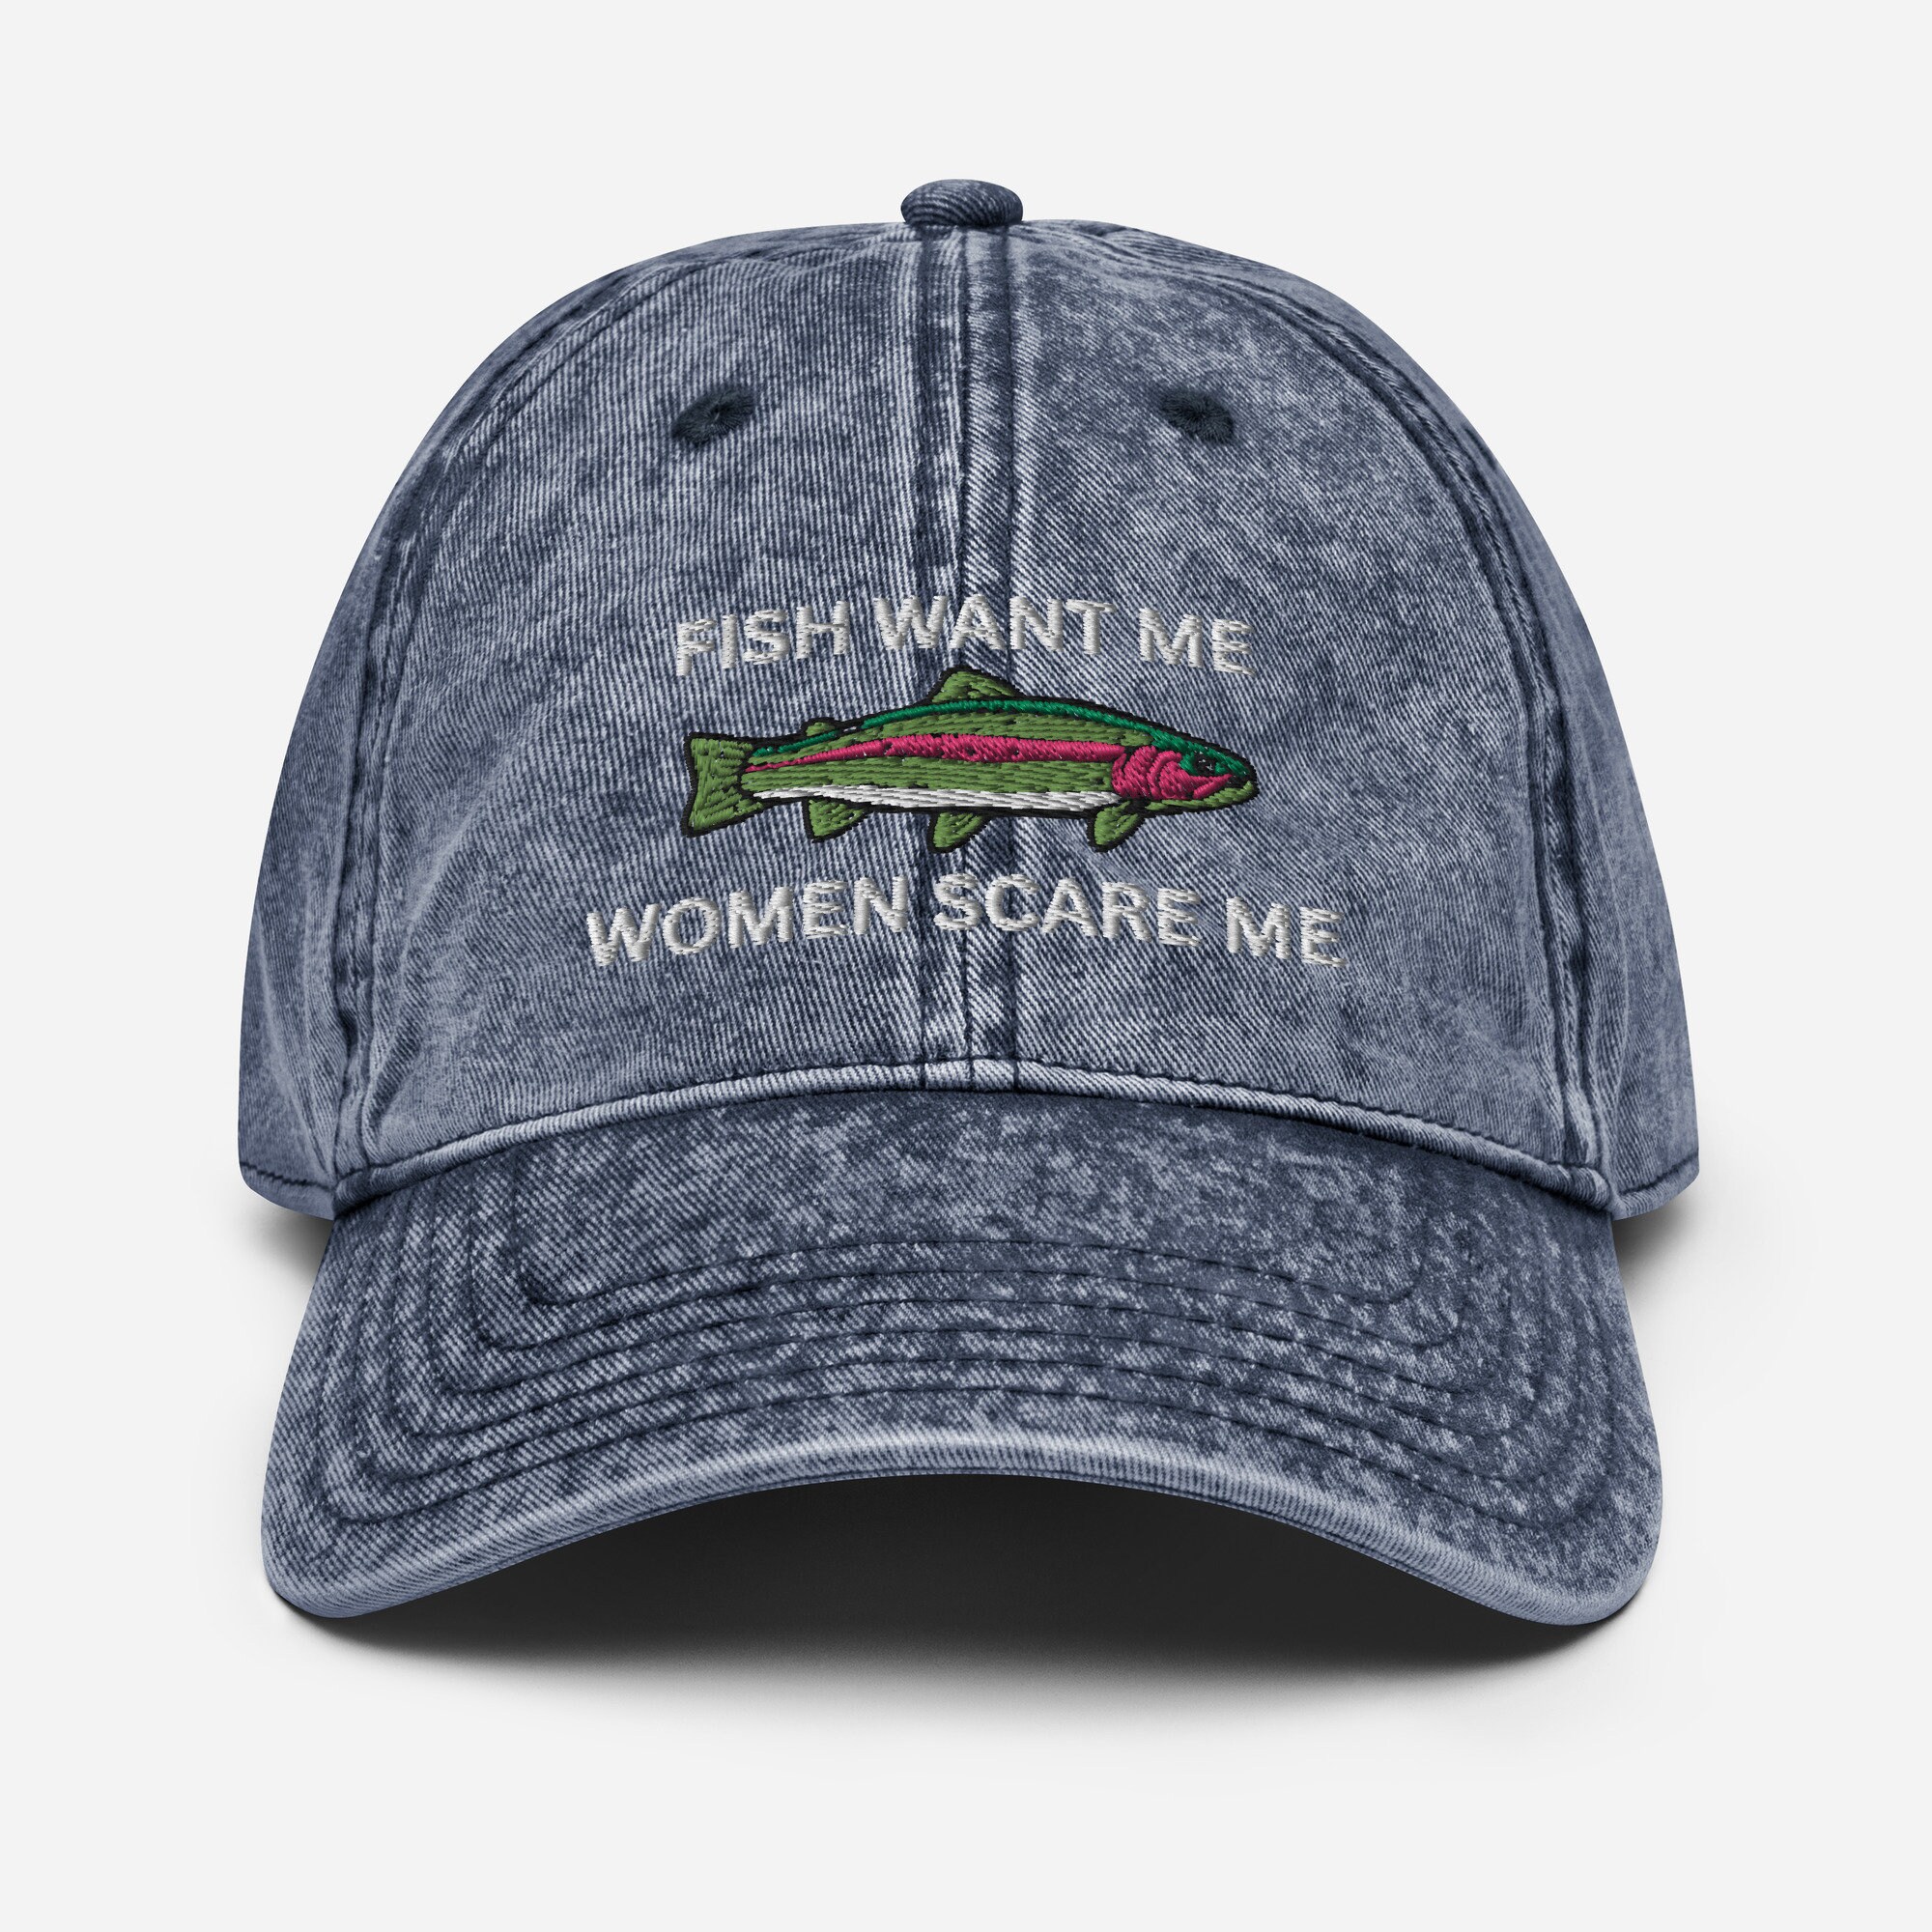 Fish Want Me Women Scare Me Vintage Fishing Hat for Men Summer Fishing Hat Gift Fathers Day Gift from Daughter Funny Fishing Hat Present